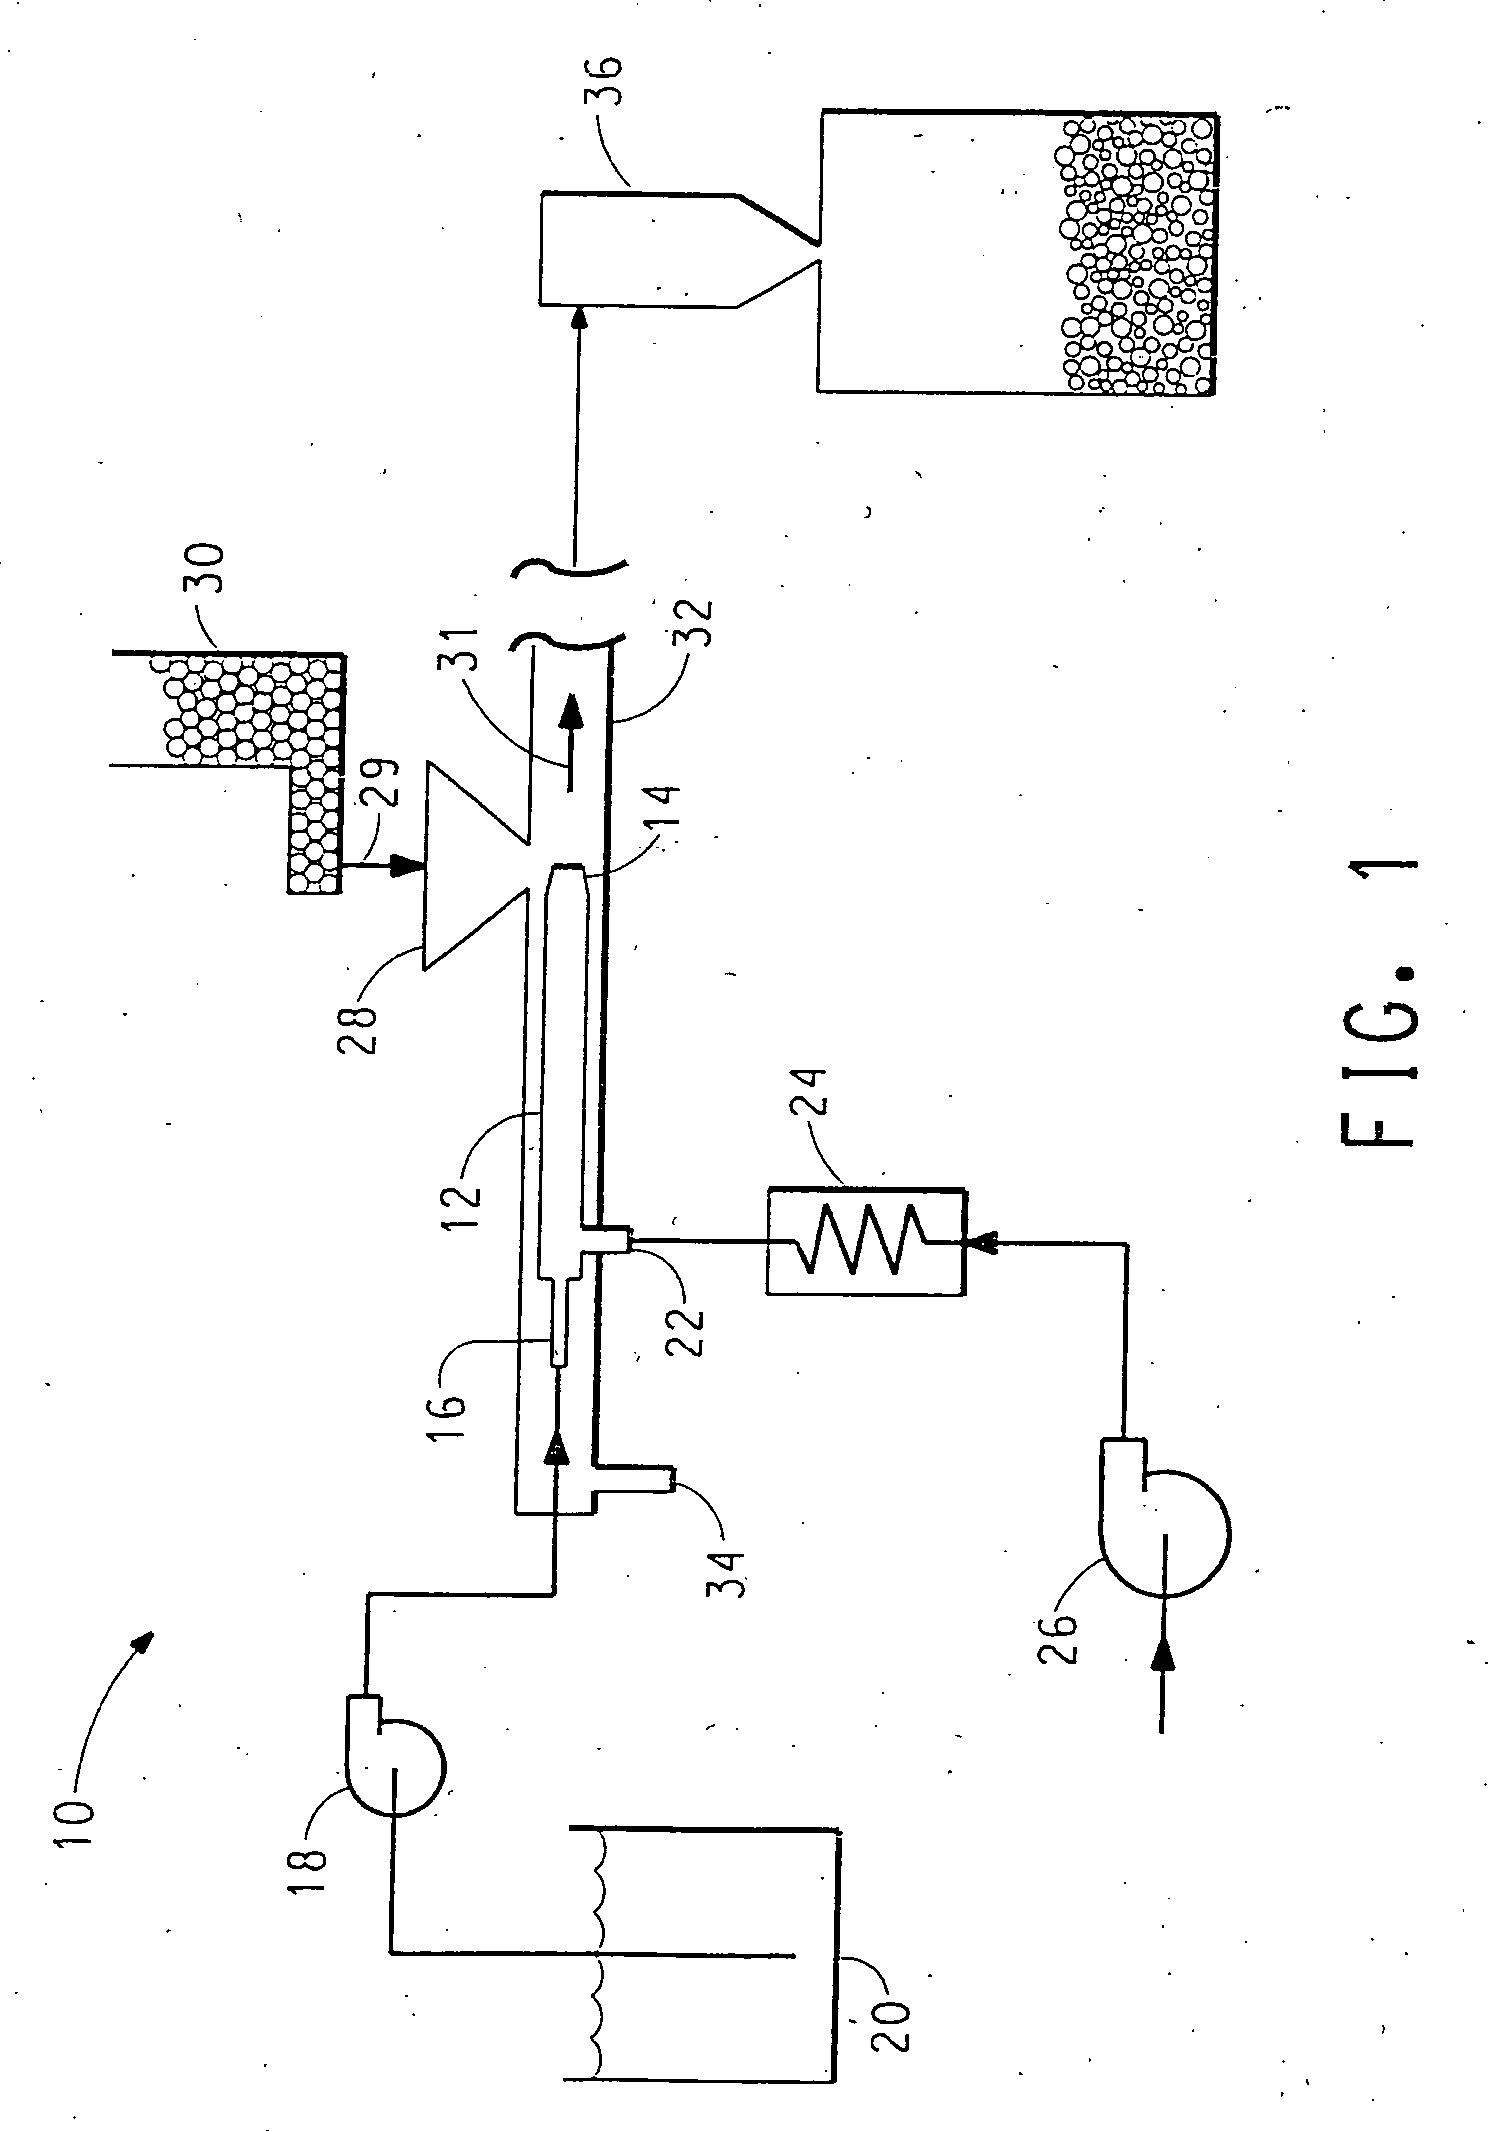 Composition for controlled sustained release of a gas